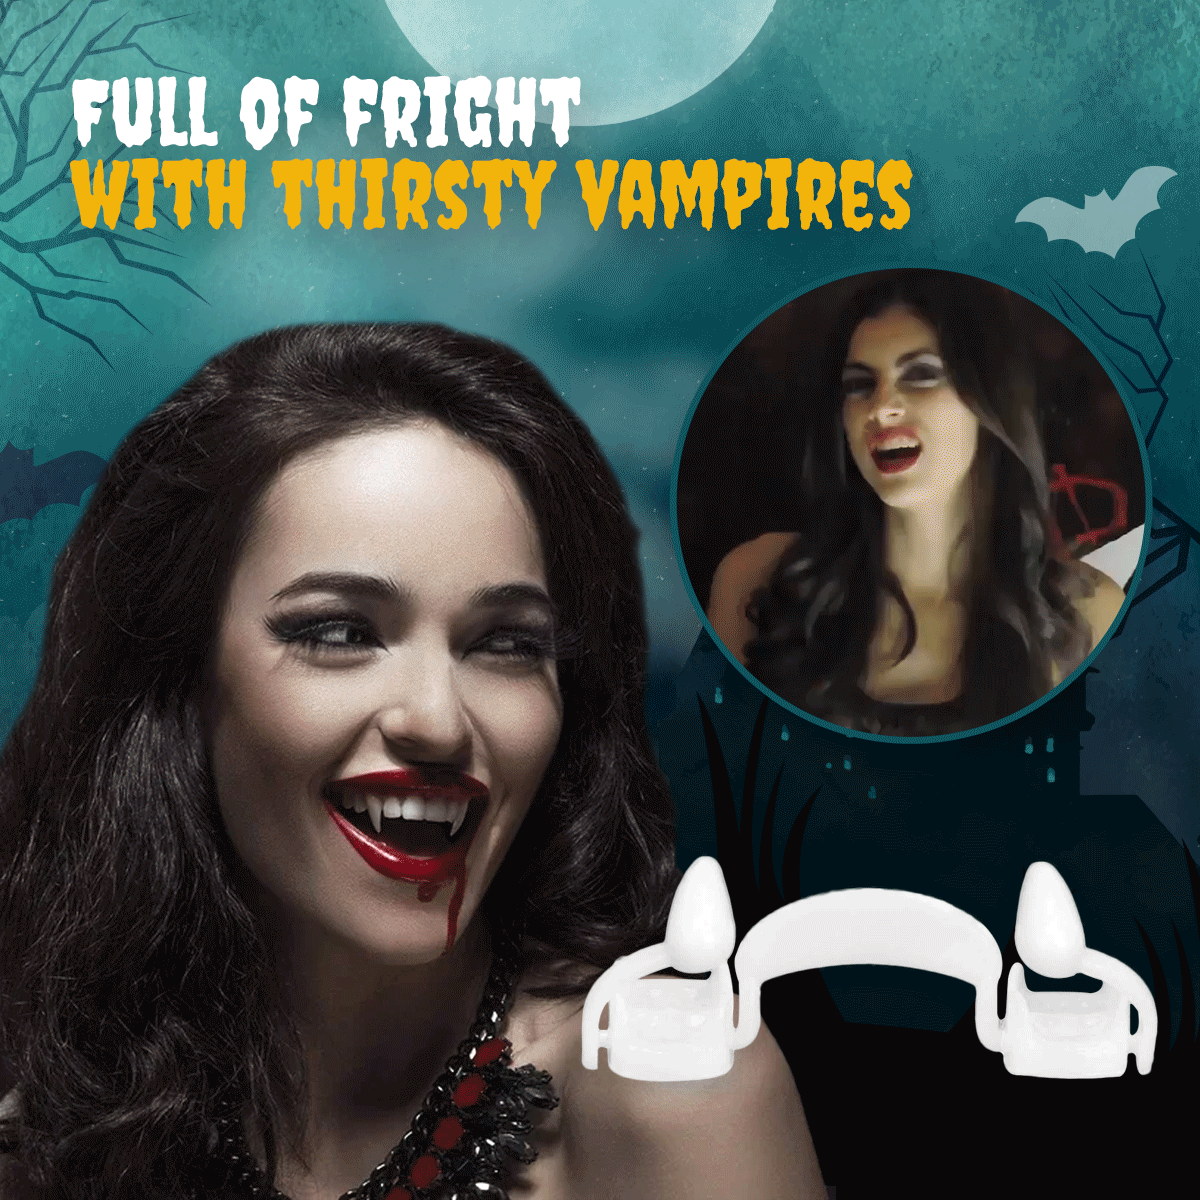 Automatic Retractable Vampire Fangs - Easy to Use and Durable Fangs for Costumes